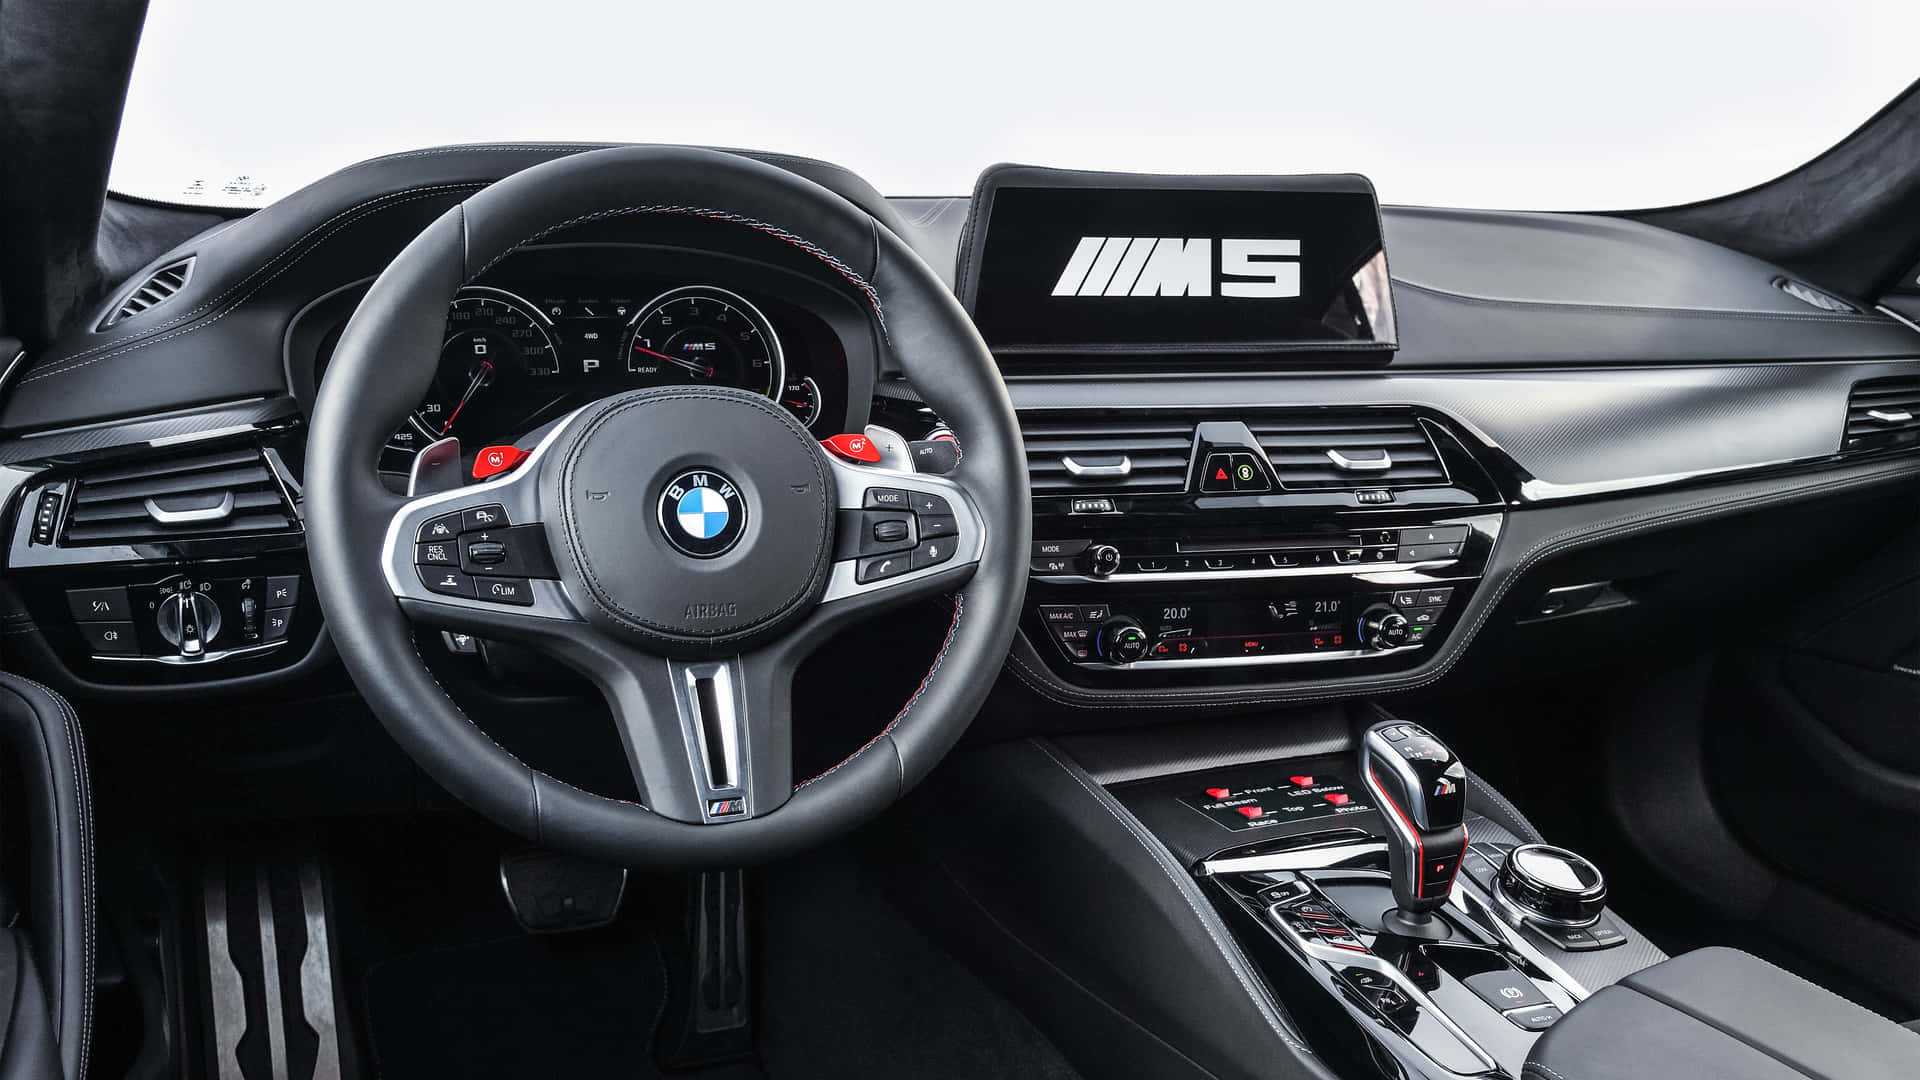 Download Image Bold And Powerful: The Bmw M5 Wallpaper | Wallpapers.Com